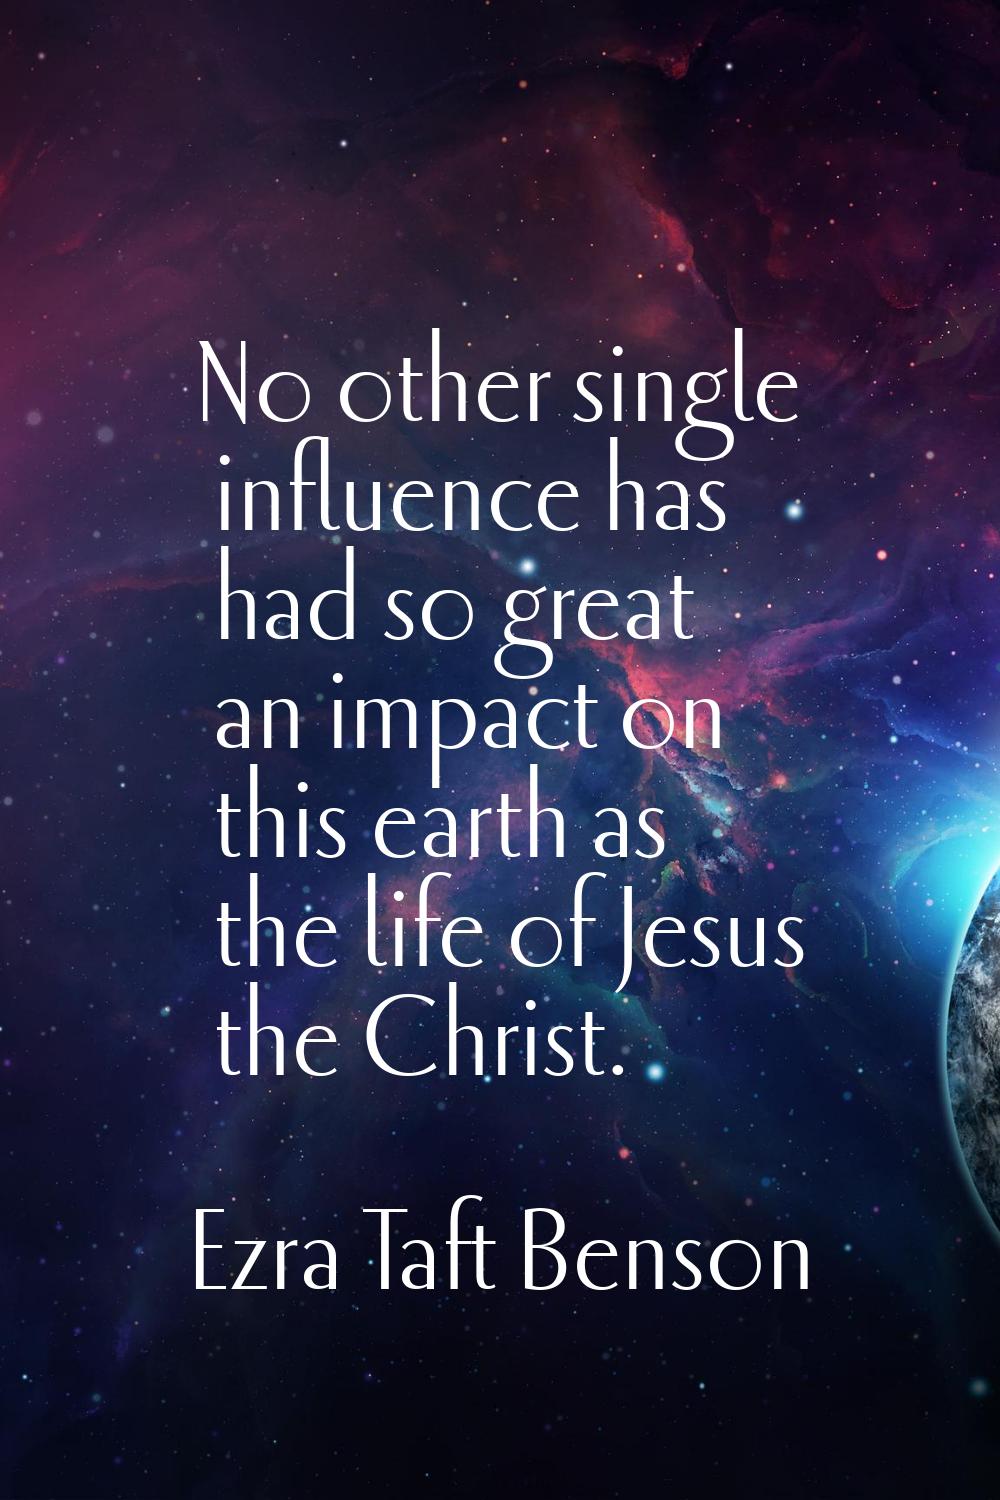 No other single influence has had so great an impact on this earth as the life of Jesus the Christ.